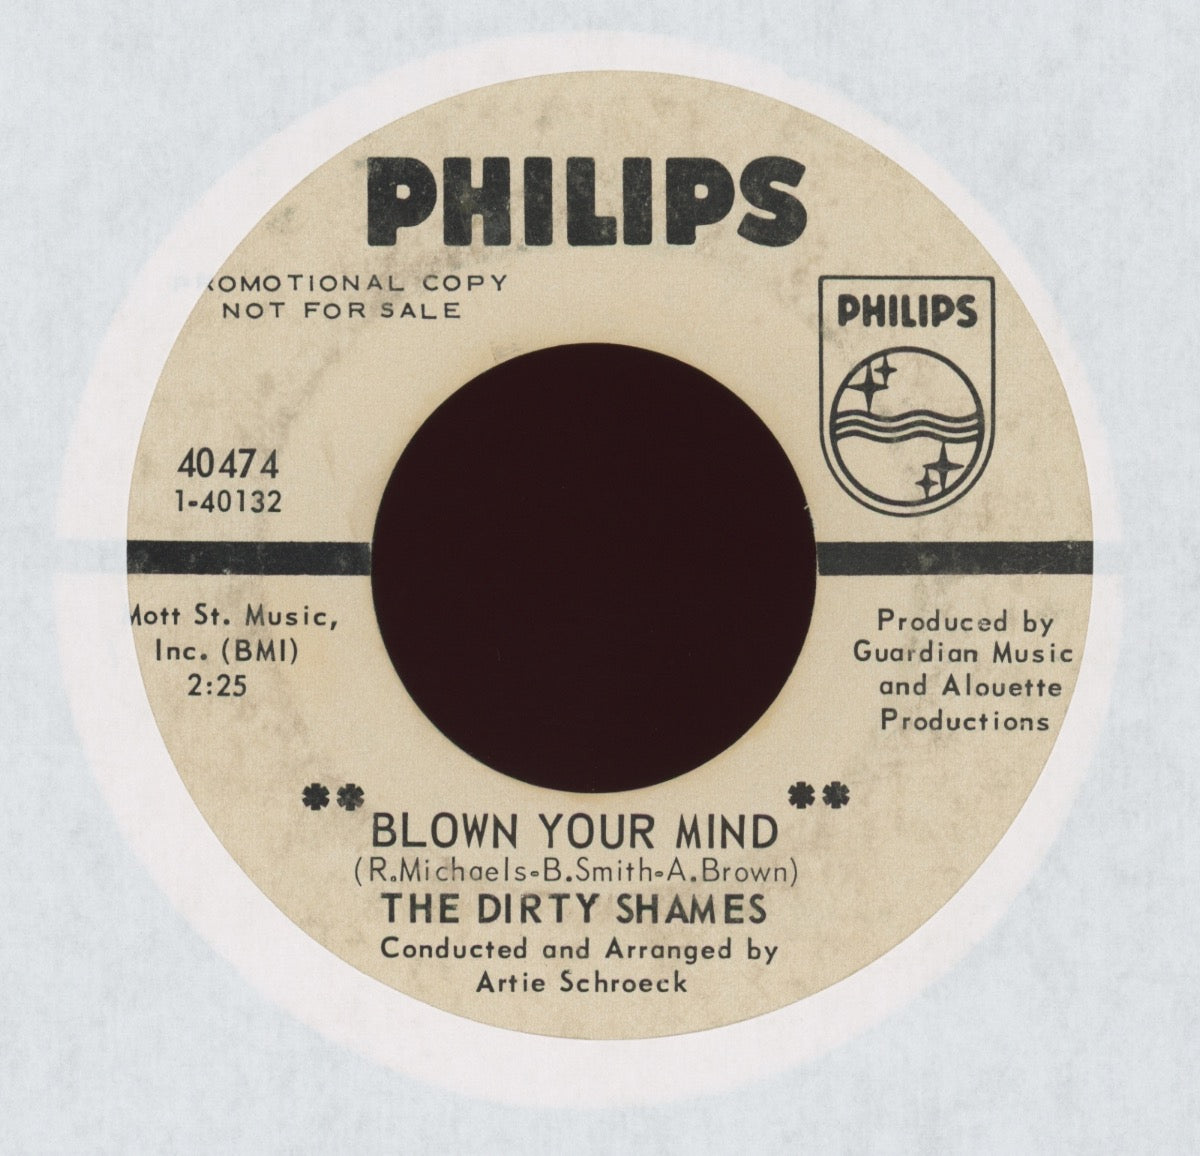 The Dirty Shames - Blown Your Mind on Philips Promo